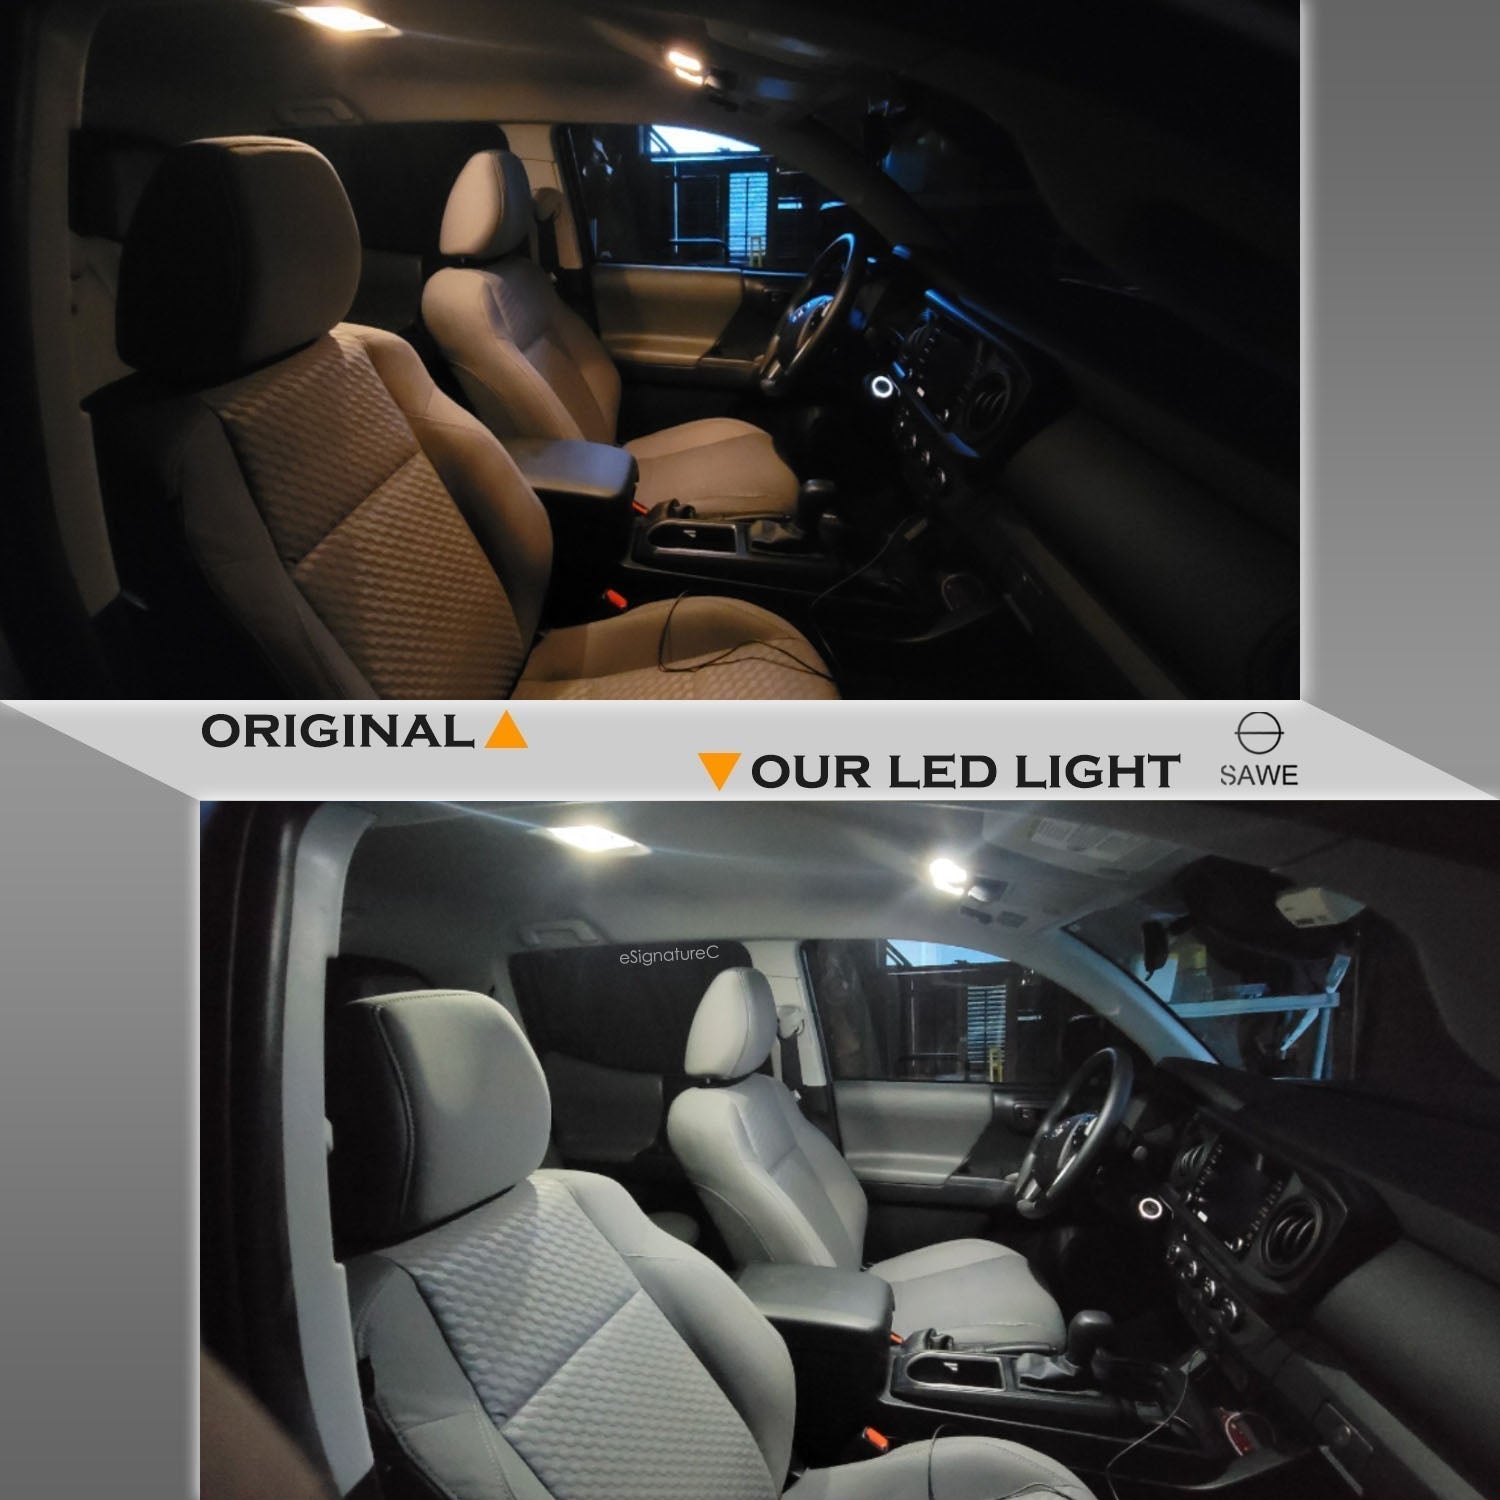 For Nissan Altima Interior LED Lights - Dome & Map Light Bulbs Package Kit for 2002 - 2006 - White